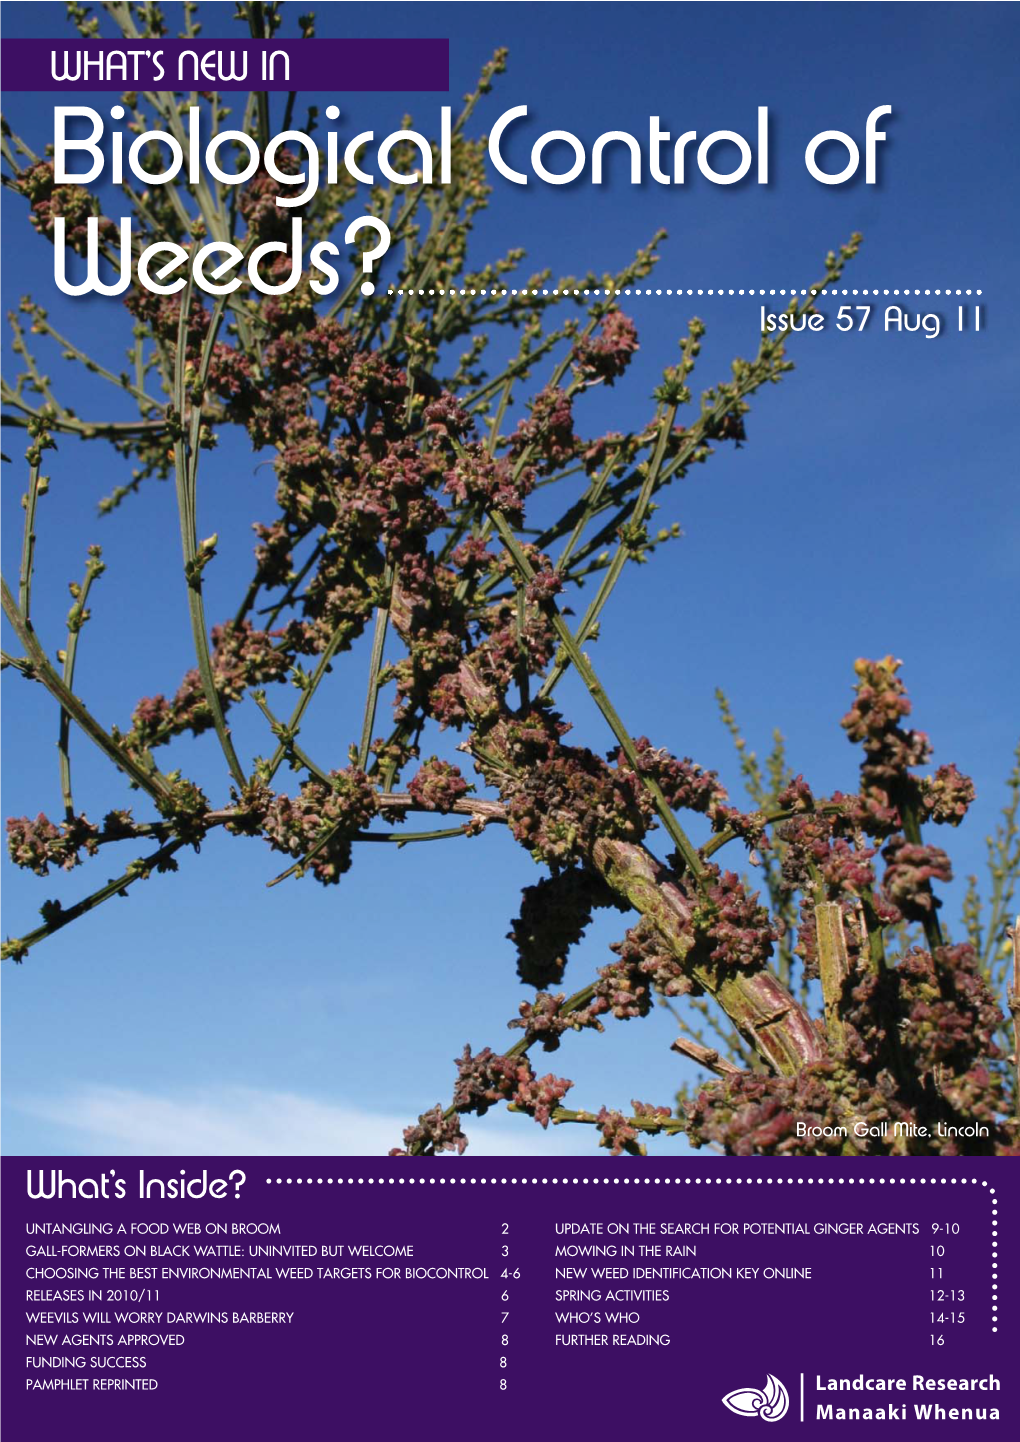 What's New in Biological Control of Weeds?